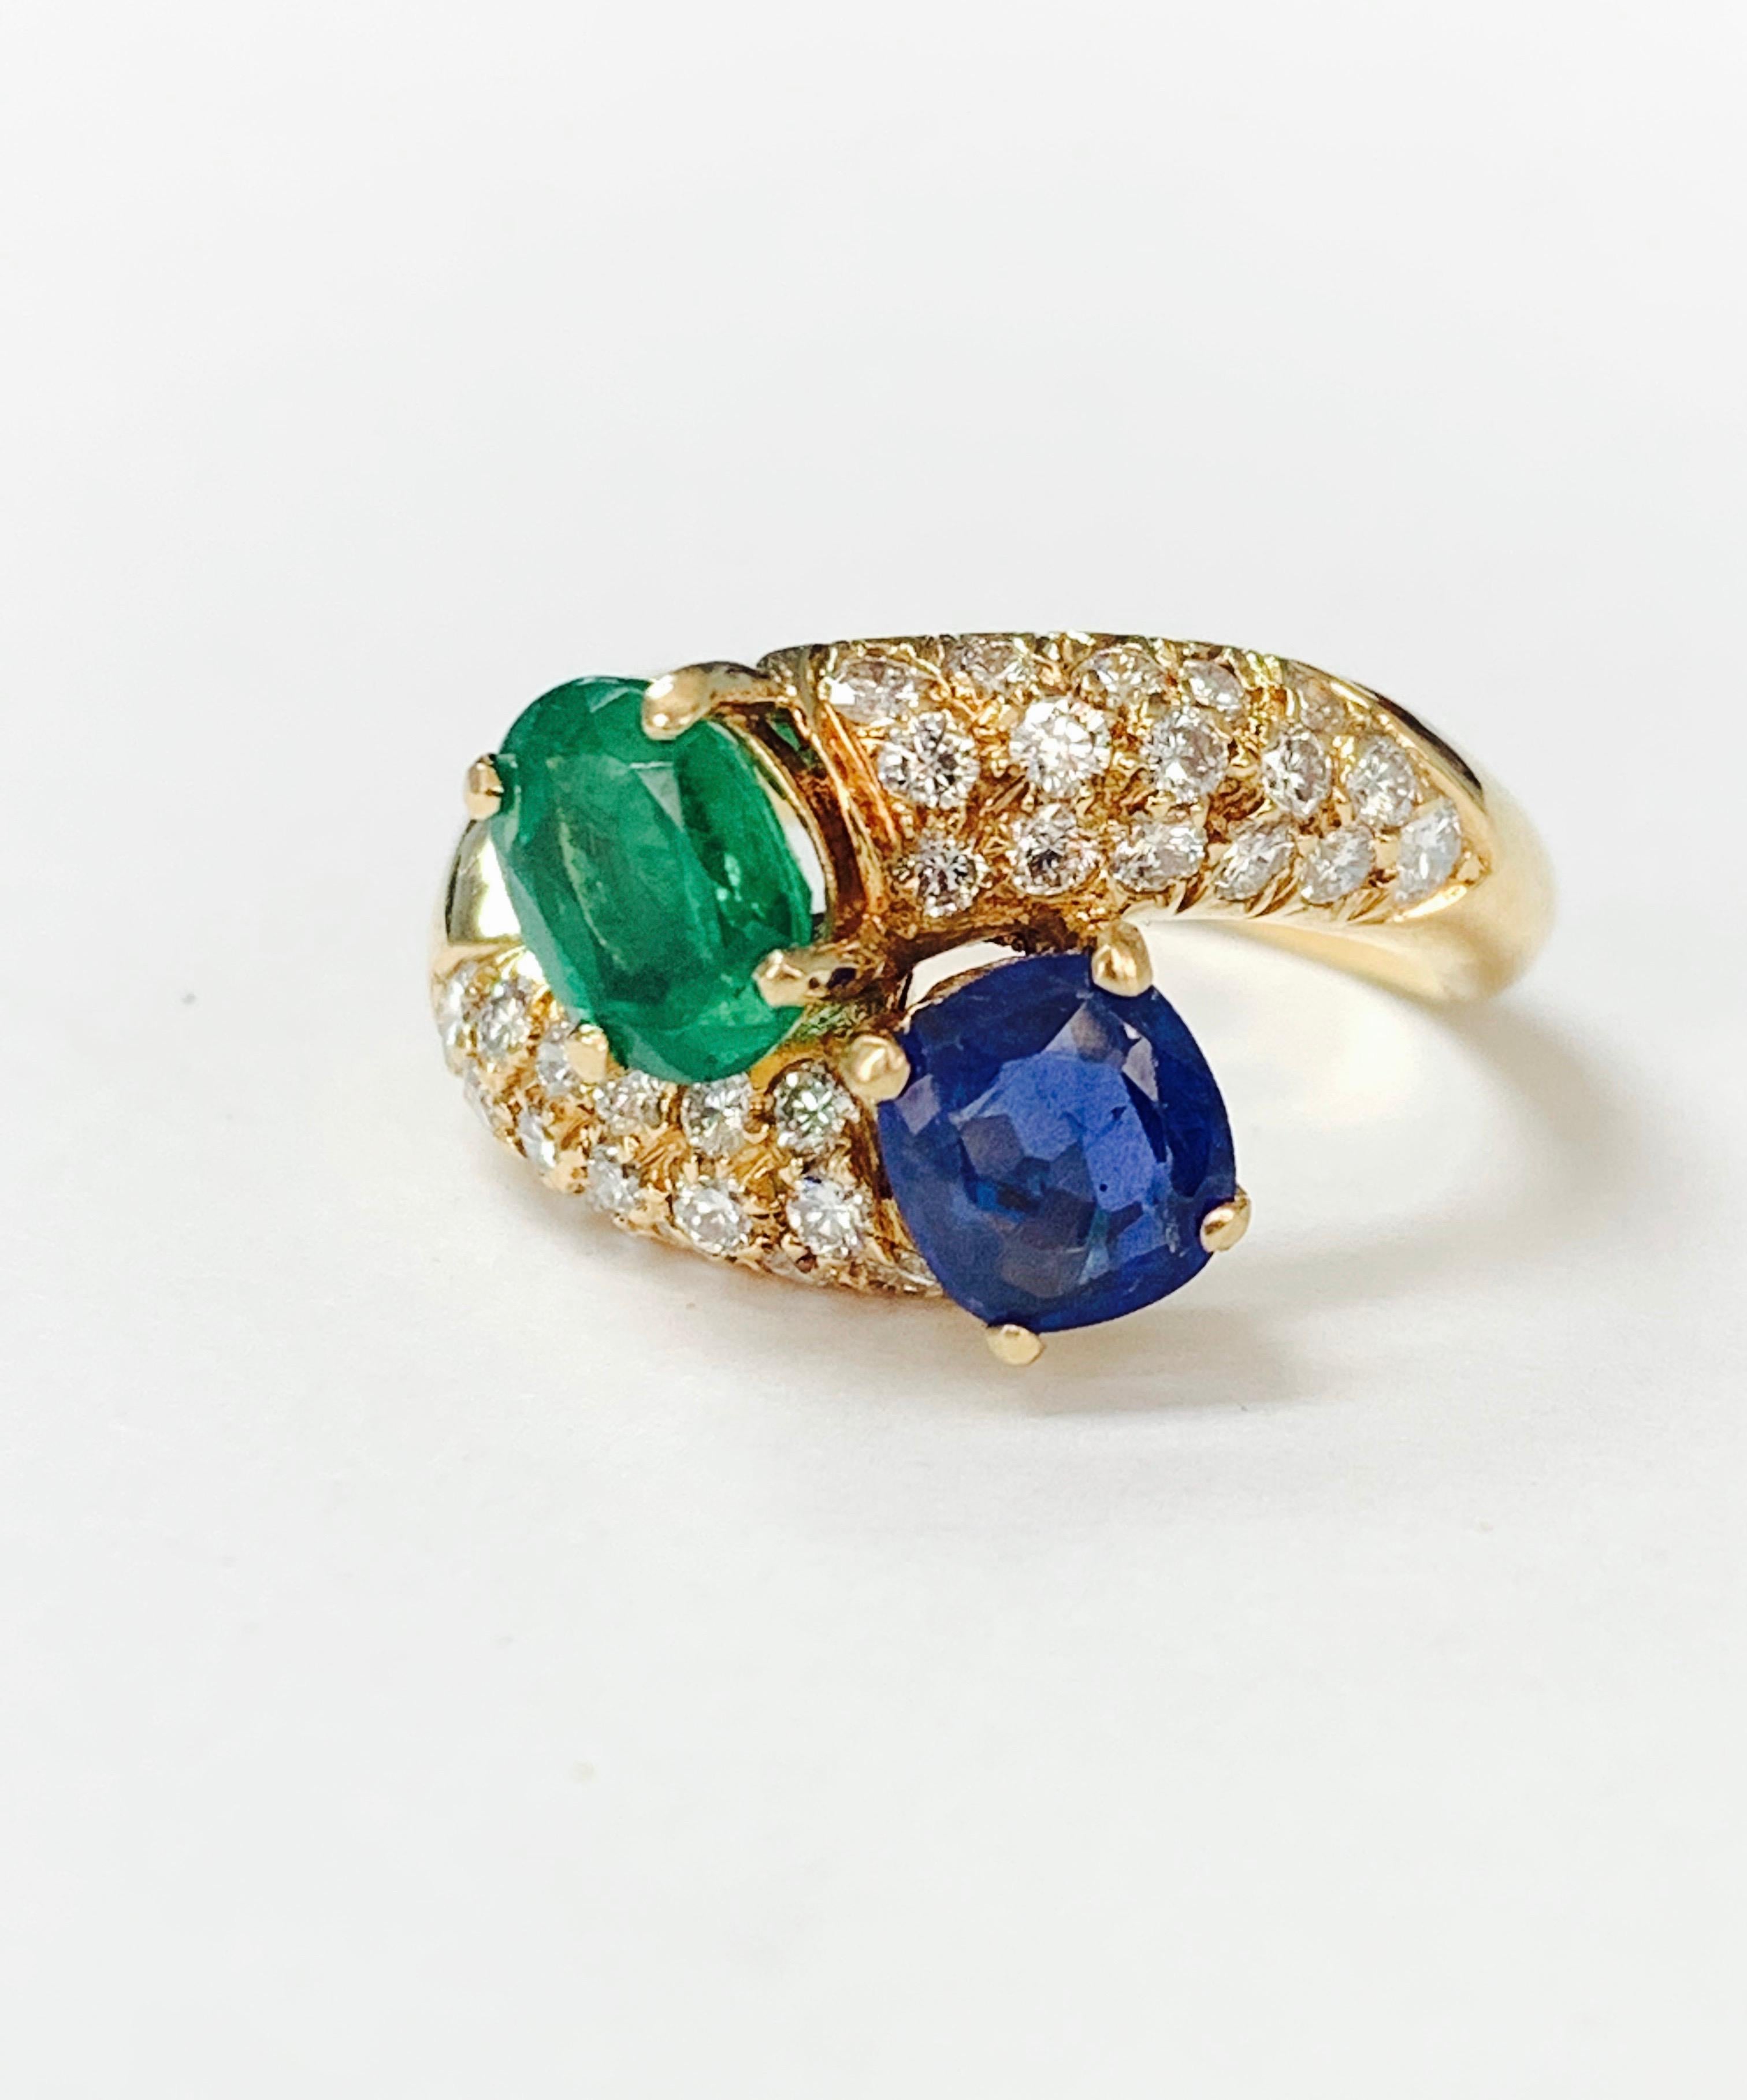 Emerald, blue sapphire and diamond twin ring beautifully handcrafted in 18k yellow gold. 
The details are as follows : 
Emerald weight : 1.25 carat 
Blue sapphire weight : 1.15 carat 
Diamond weight : 0.75 carat 
Metal : 18k Yellow gold 
Ring size :